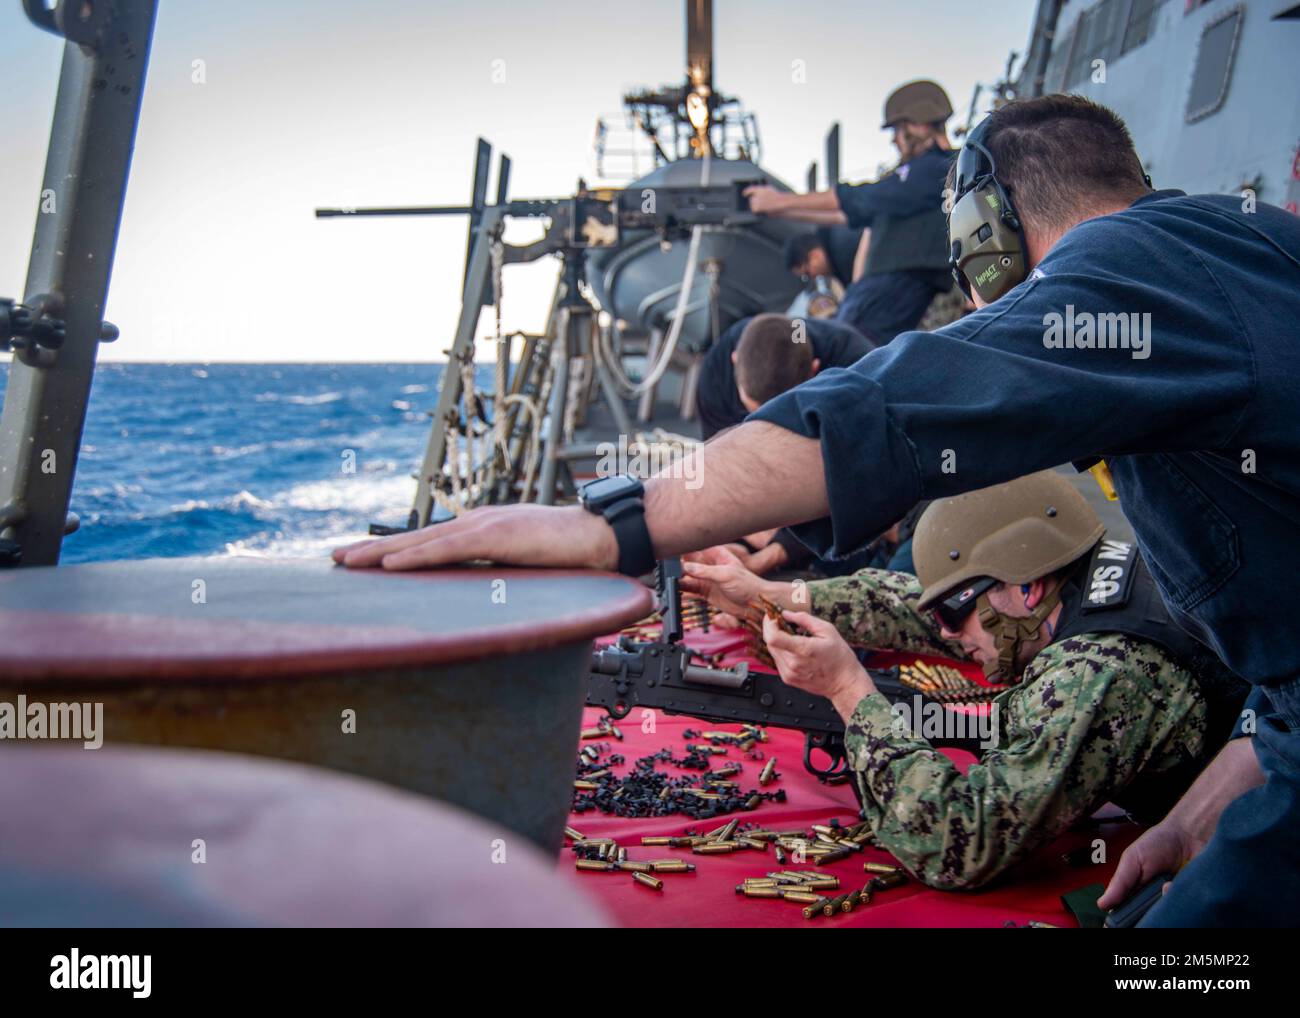 220326-N-FS190-1103 ATLANTIC OCEAN (March 26, 2022 Sailors assigned to the Arleigh Burke-class guided-missile destroyer USS Truxtun (DDG 103) qualify to man the M240B and .50 caliber machine guns during a crew-served weapons shoot onboard the for Task Force Exercise (TFEX), Mar. 26, 2022. TFEX is a scenario driven exercise that serves as certification for independent deploying ships and is designated to test mission readiness and performance in integrated operations. Truxtun is underway for Carrier Strike Group (CSG) 4 training evolutions. Stock Photo